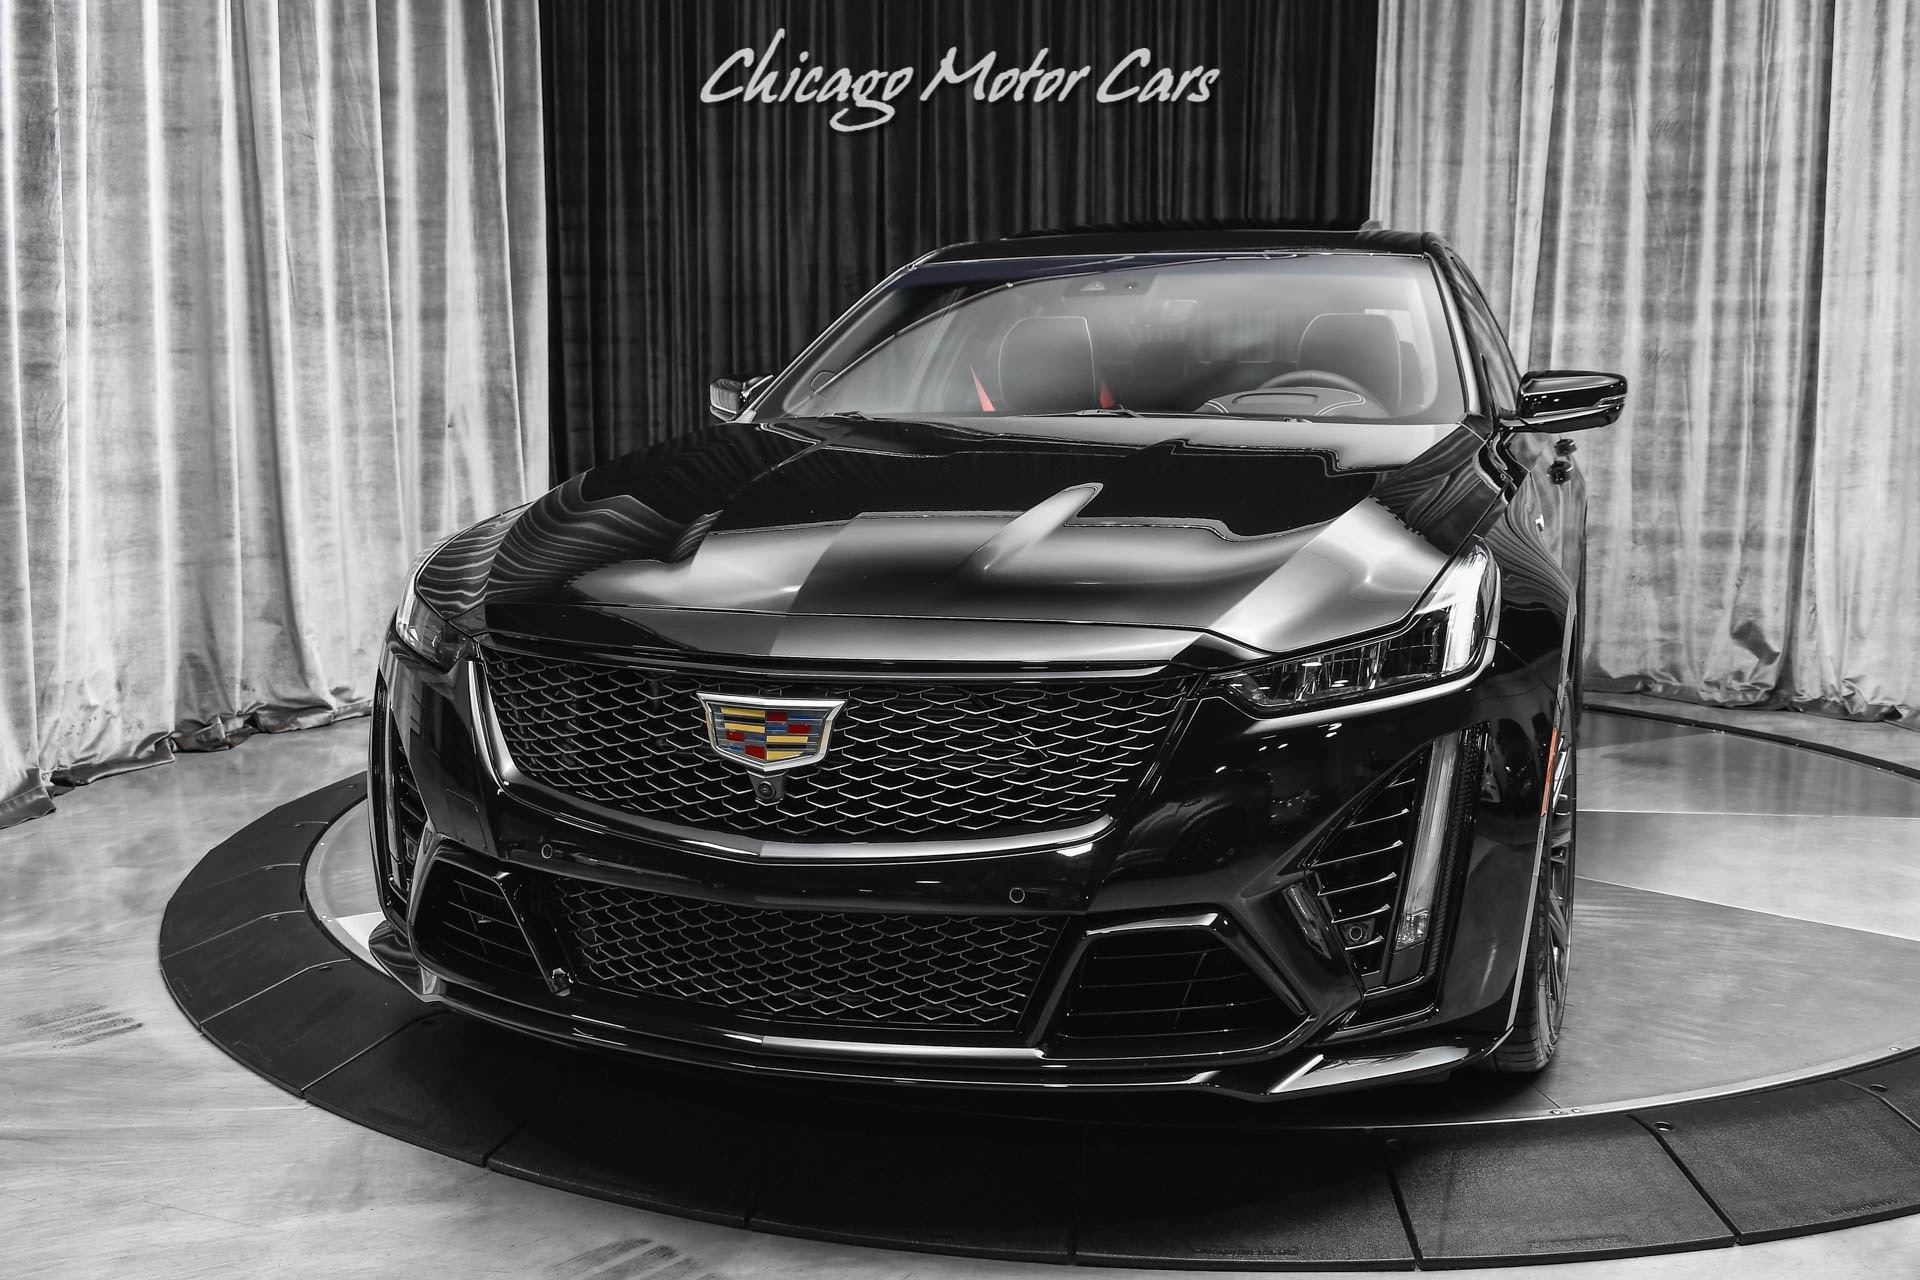 Used 2022 Cadillac CT5-V Blackwing Sedan ONLY 300 Miles Carbon Ceramics!  Perf. Data Recorder! LOADED For Sale (Special Pricing) | Chicago Motor Cars  Stock #19432